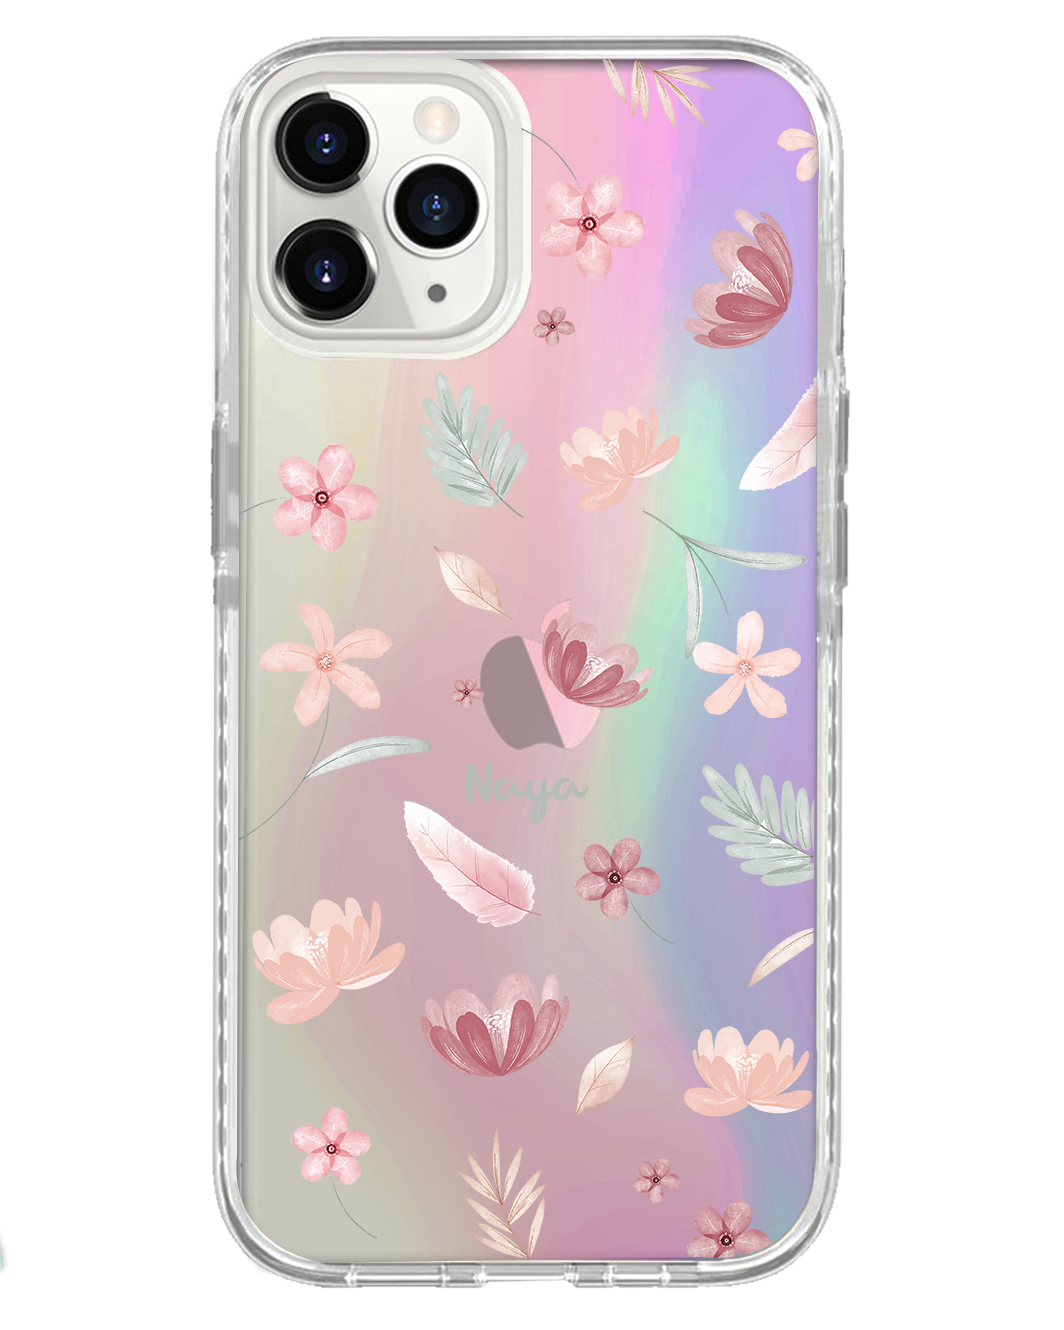 iPhone Rearguard Holo - Wild Flower